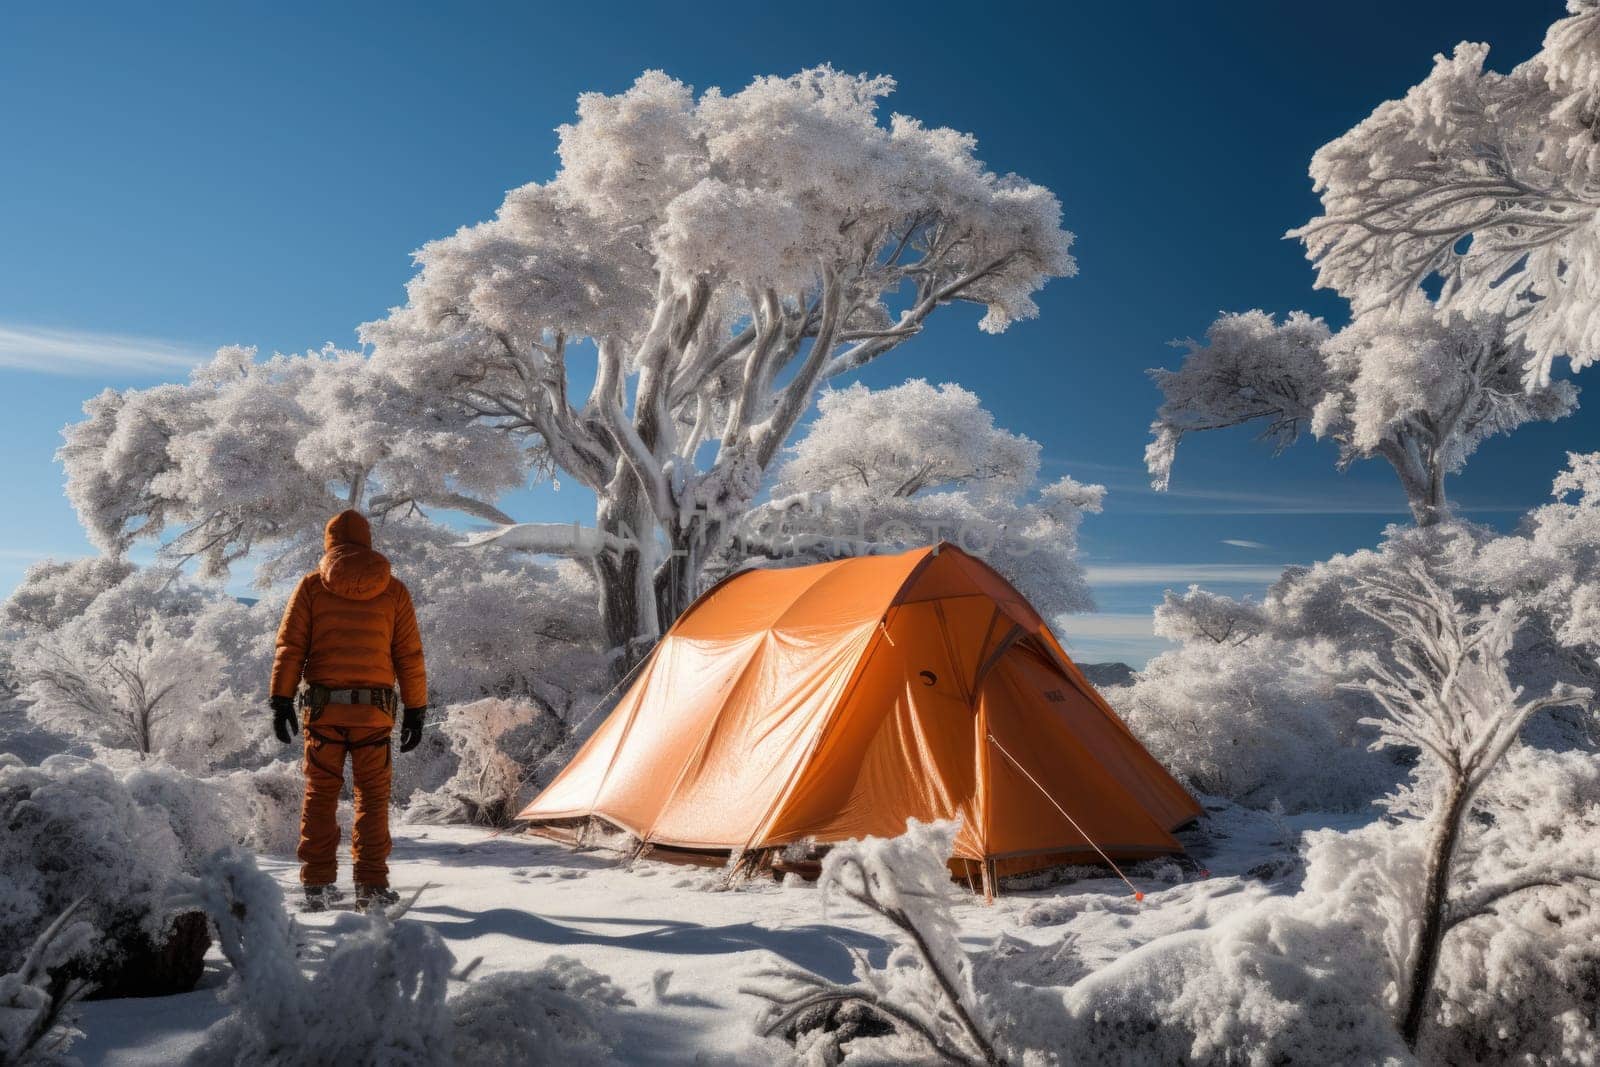 A person standing next to a tent in the snow